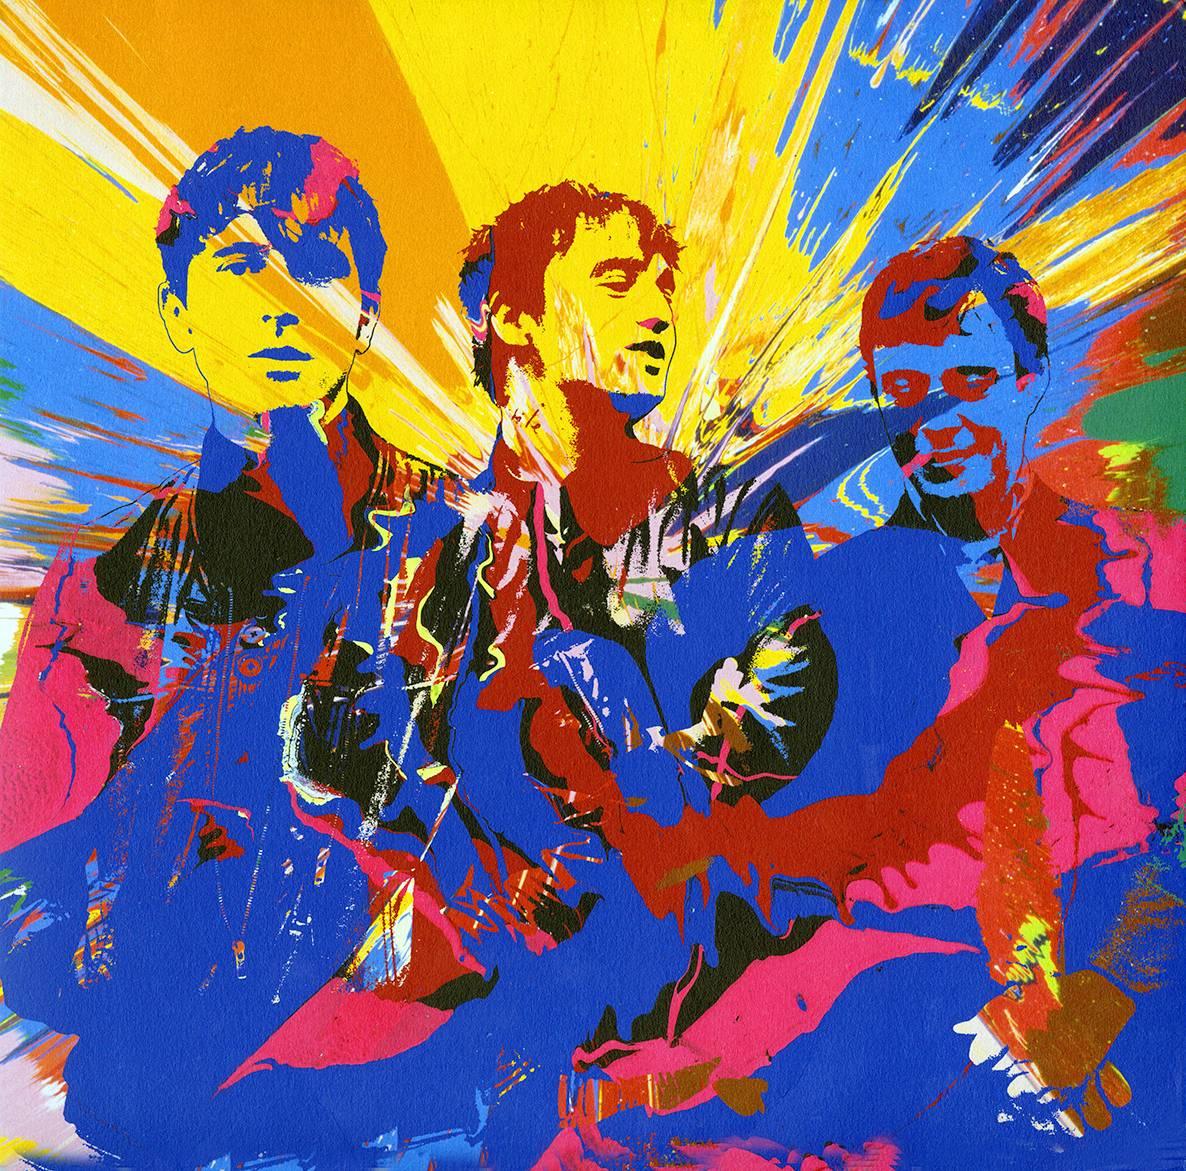 Original Album Artwork by Damien Hirst that comes with an Off-Set Lithograph Poster

Produced by Damien Hirst exclusively for the heralded UK music group Baby Shambles in 2013

Housed in a thick card gate-fold picture sleeve with an exclusive 24 x